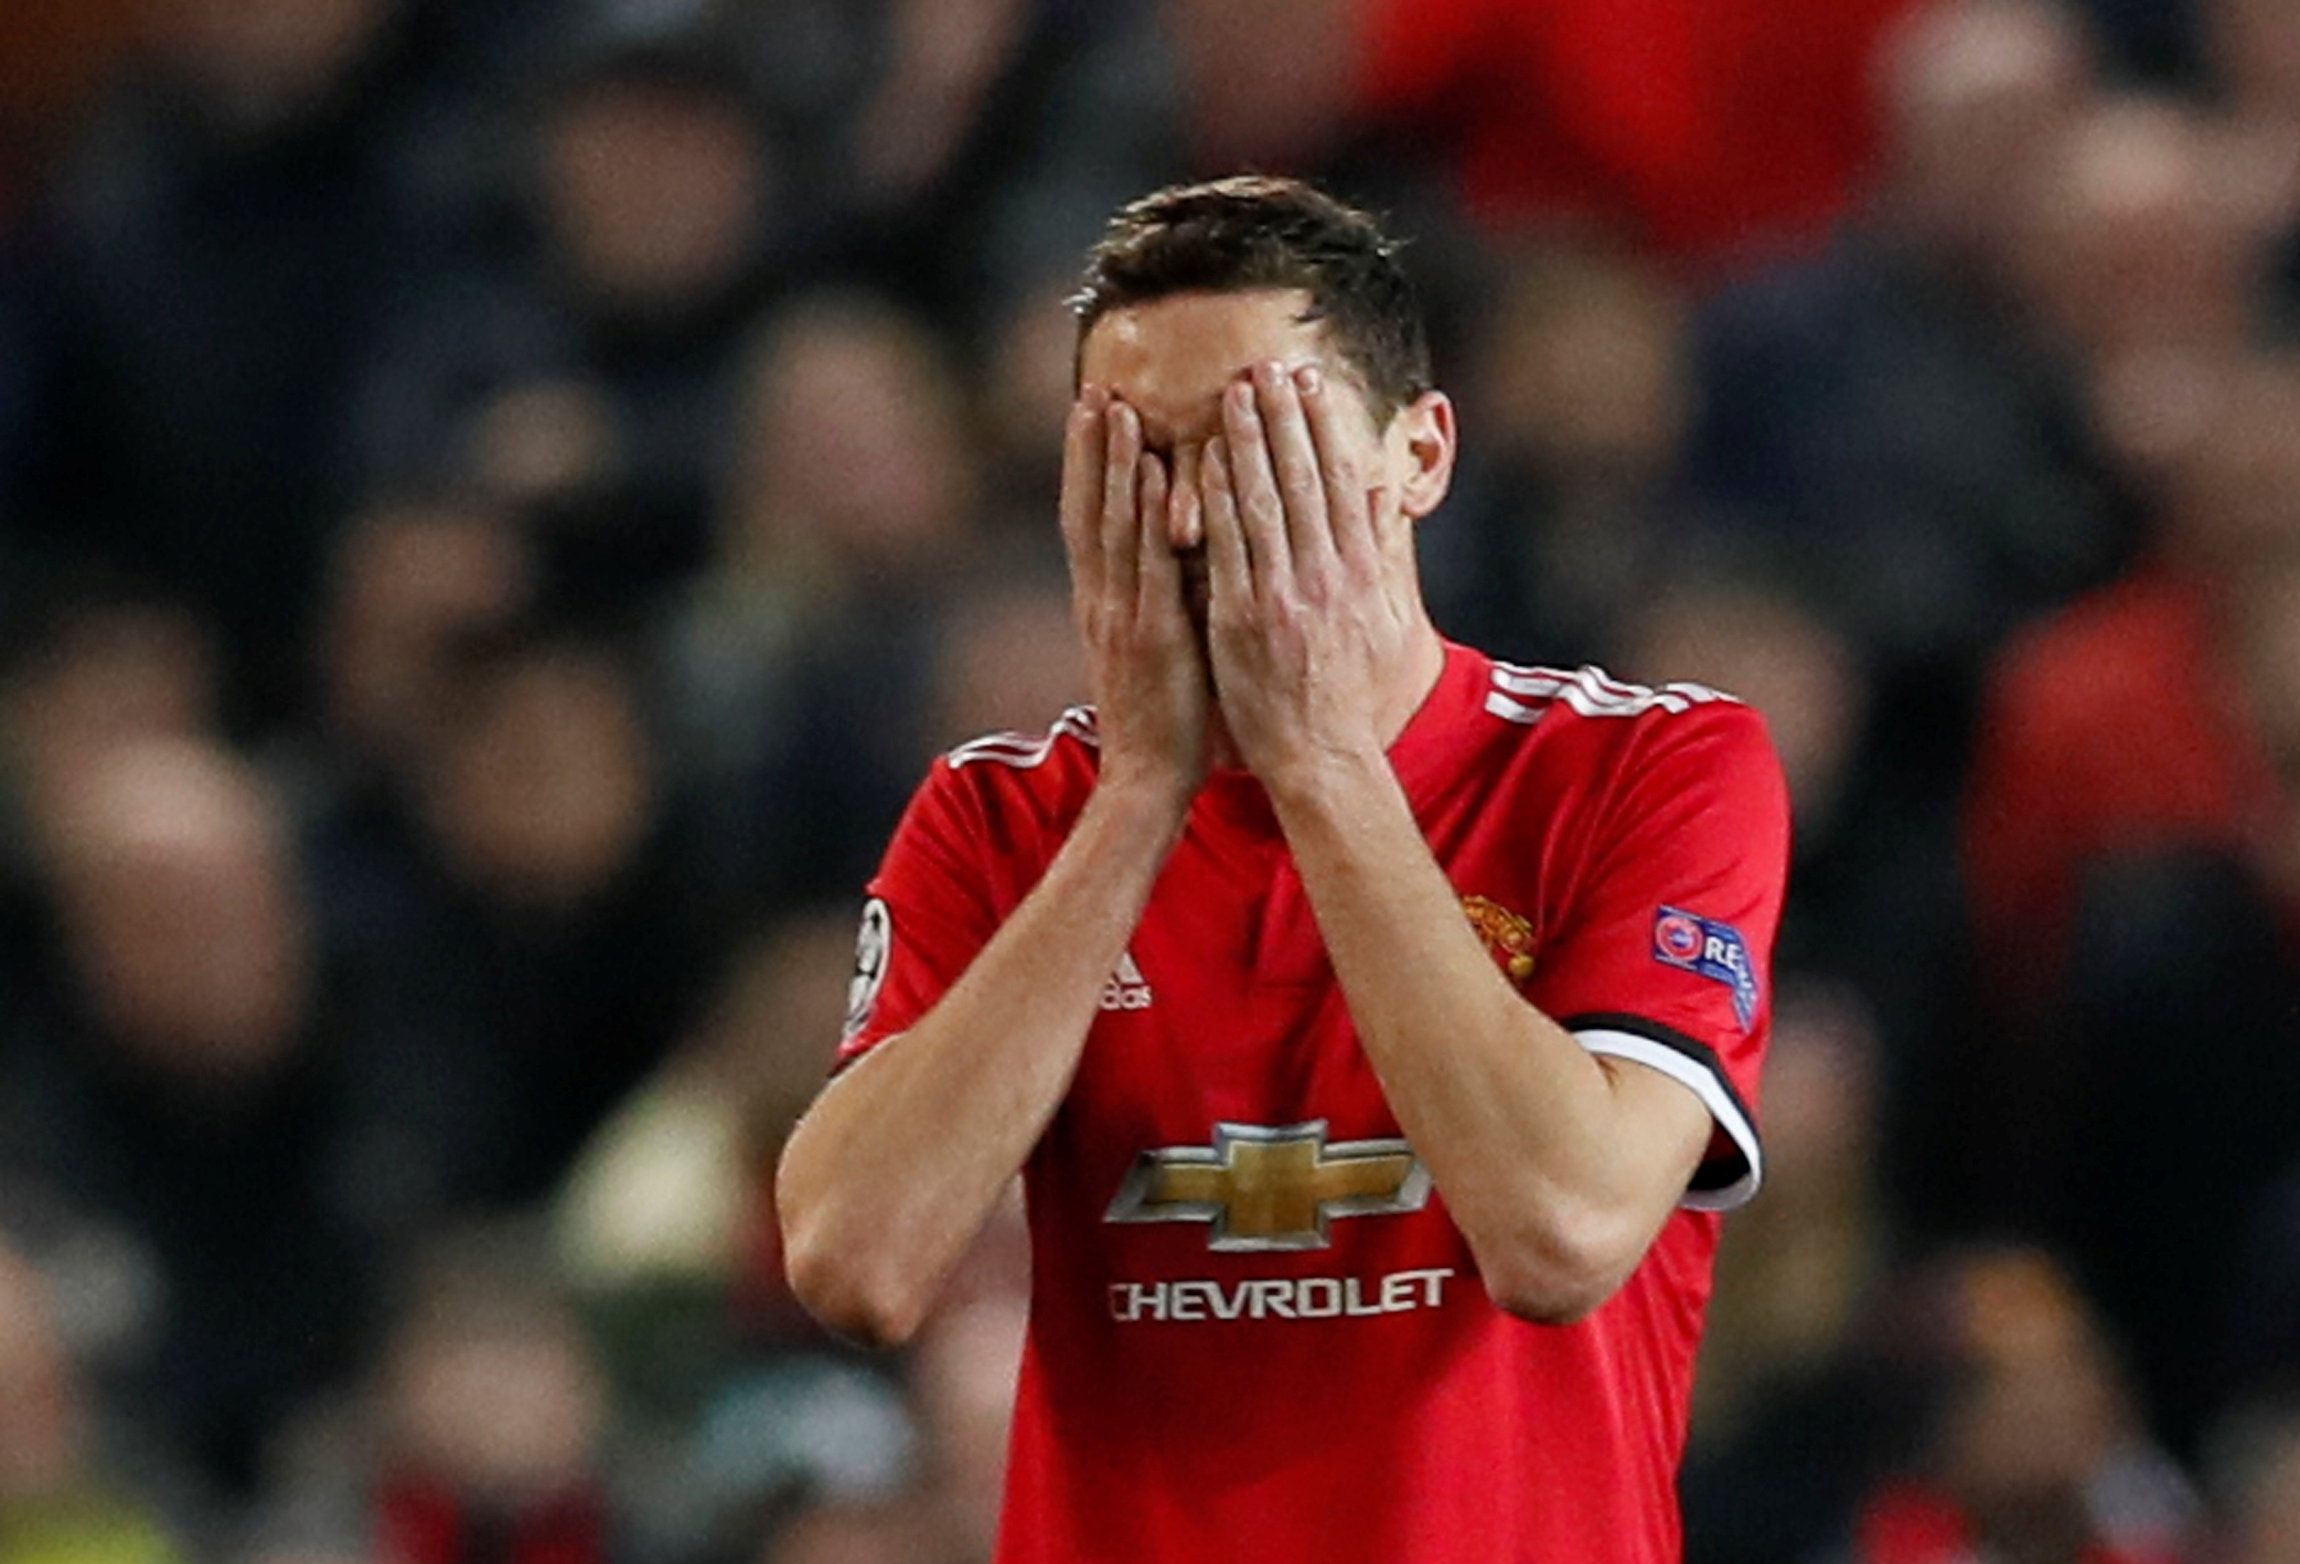 Soccer Football - Champions League Round of 16 Second Leg - Manchester United vs Sevilla - Old Trafford, Manchester, Britain - March 13, 2018   Manchester United's Nemanja Matic looks dejected                 REUTERS/David Klein